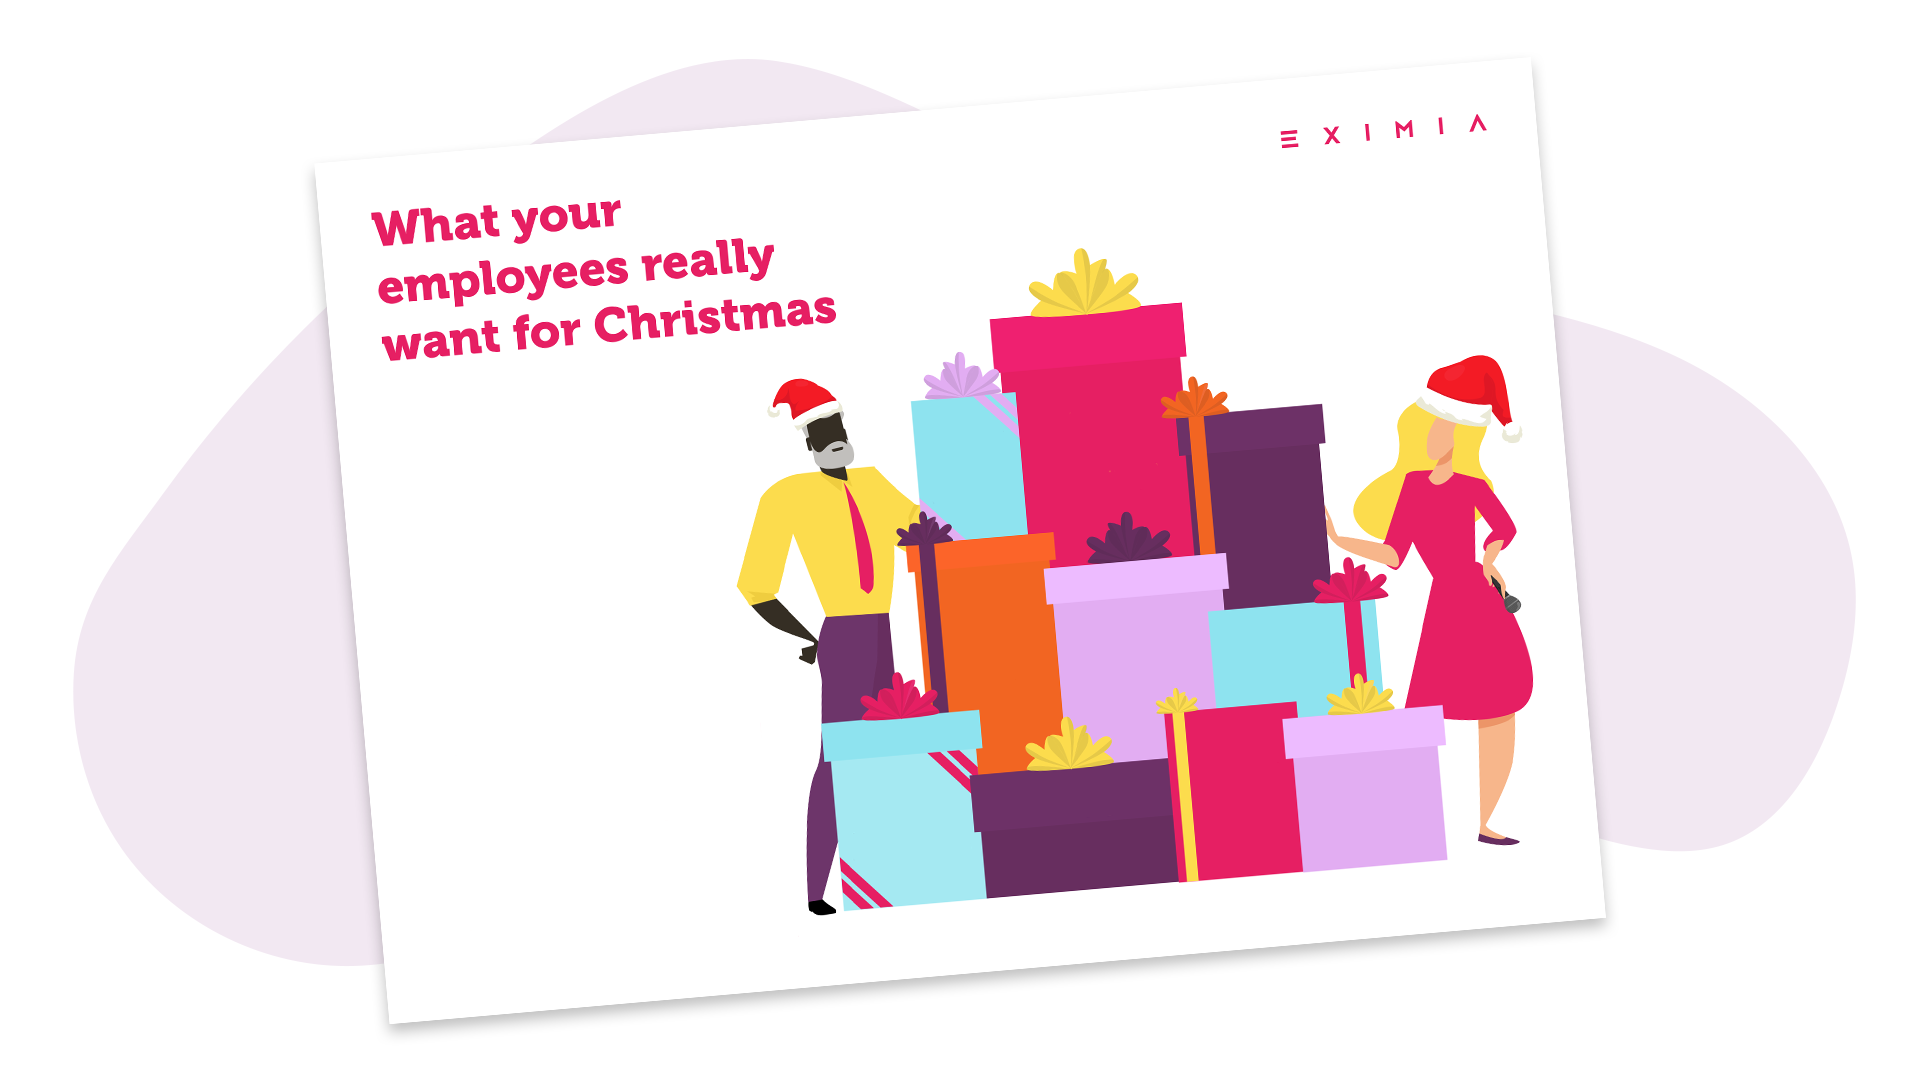 What your employees really want for Christmas - Download our infographic